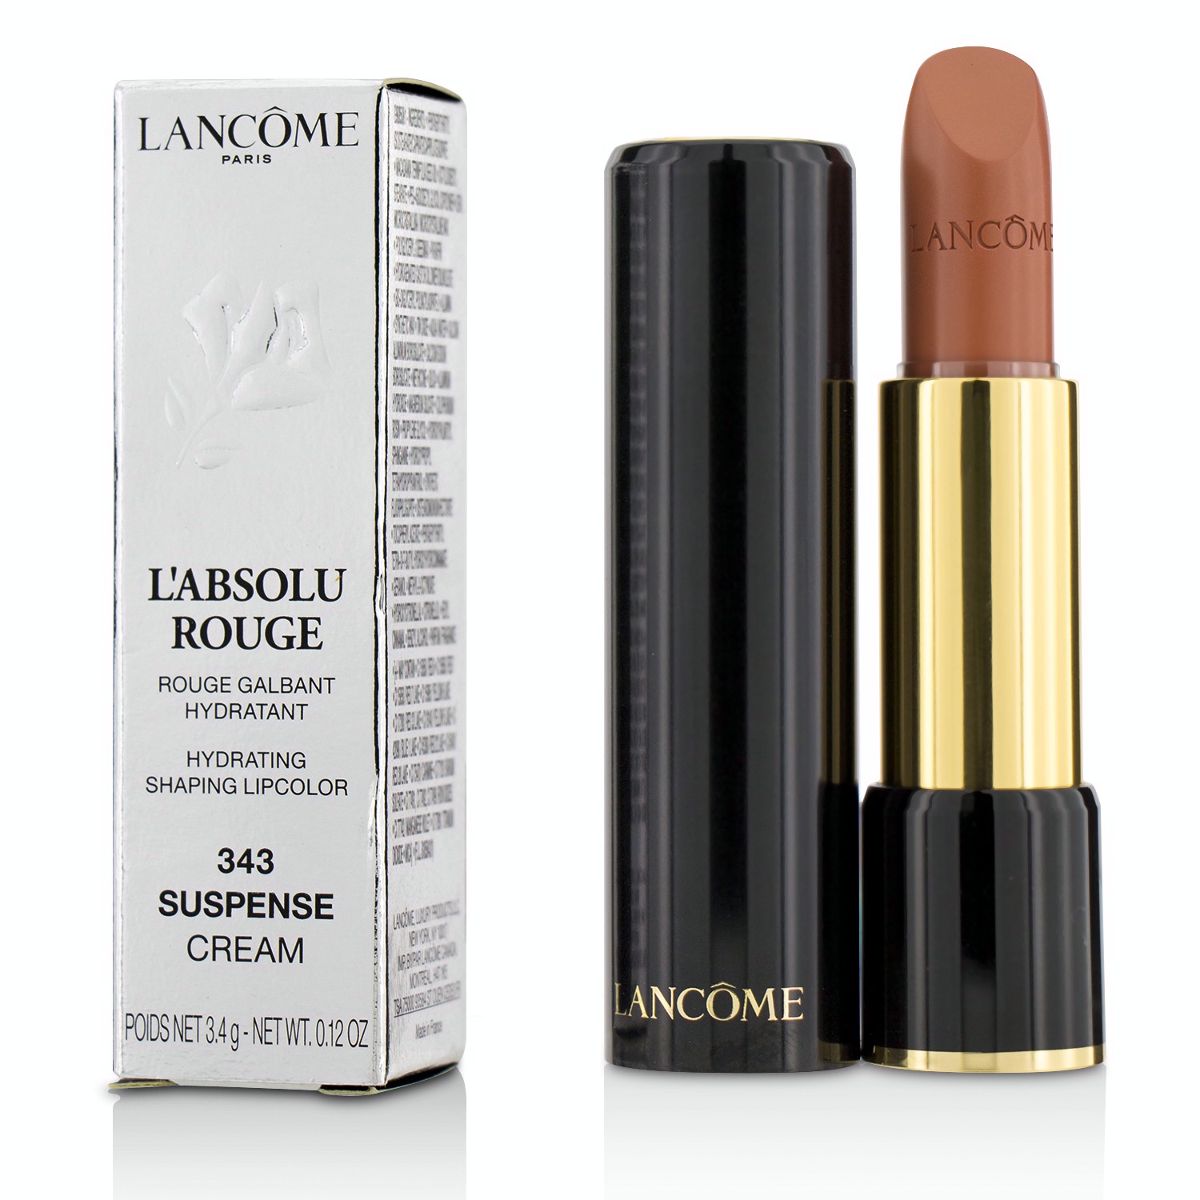 L Absolu Rouge Hydrating Shaping Lipcolor - # 343 Suspense (Cream) Lancome Image